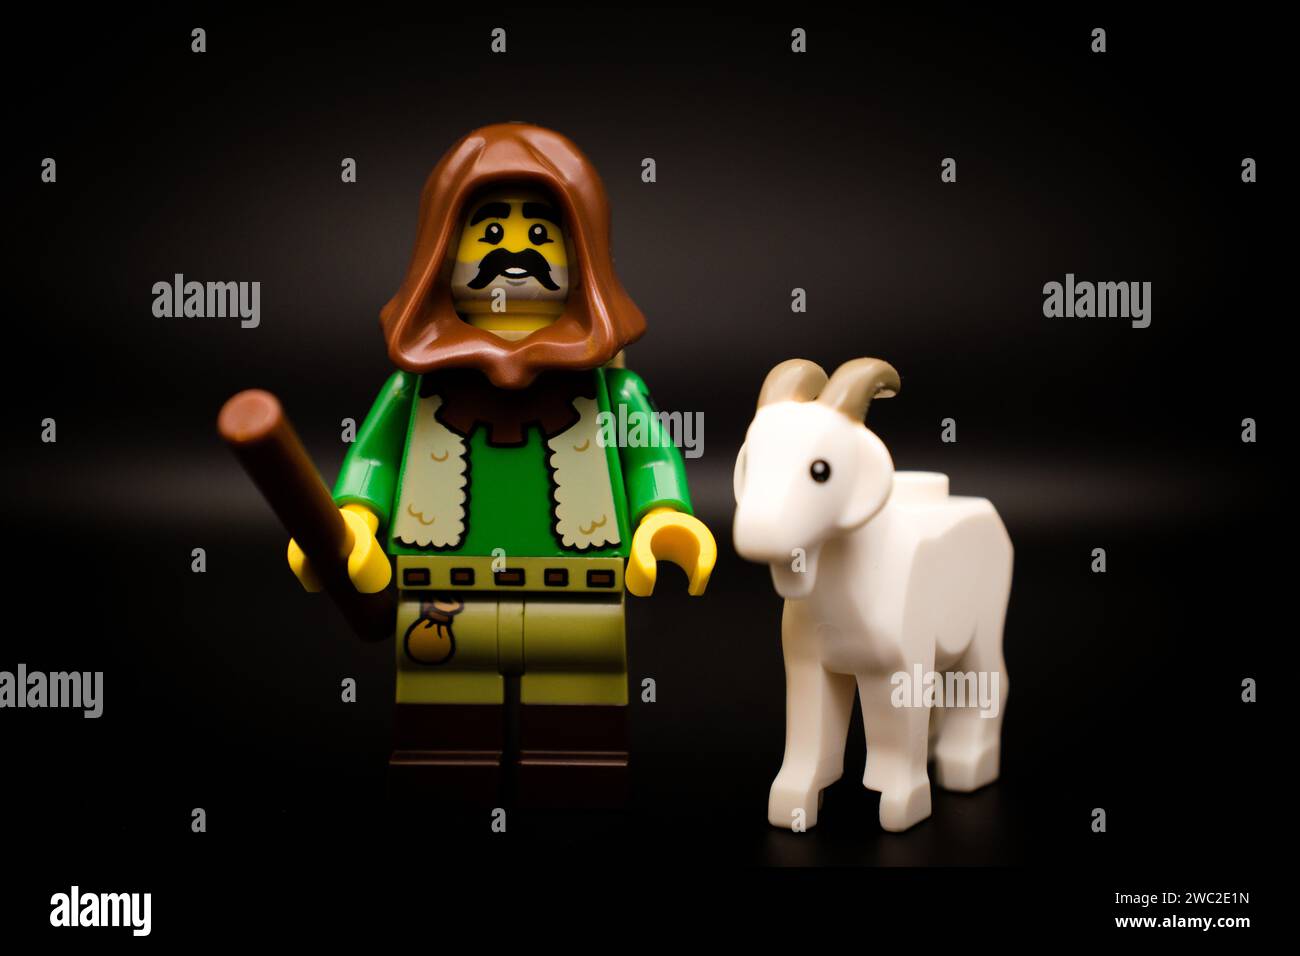 Shepherd with his goat. Lego minifigure and all other bricks are made by THE LEGO GROUP. Stock Photo